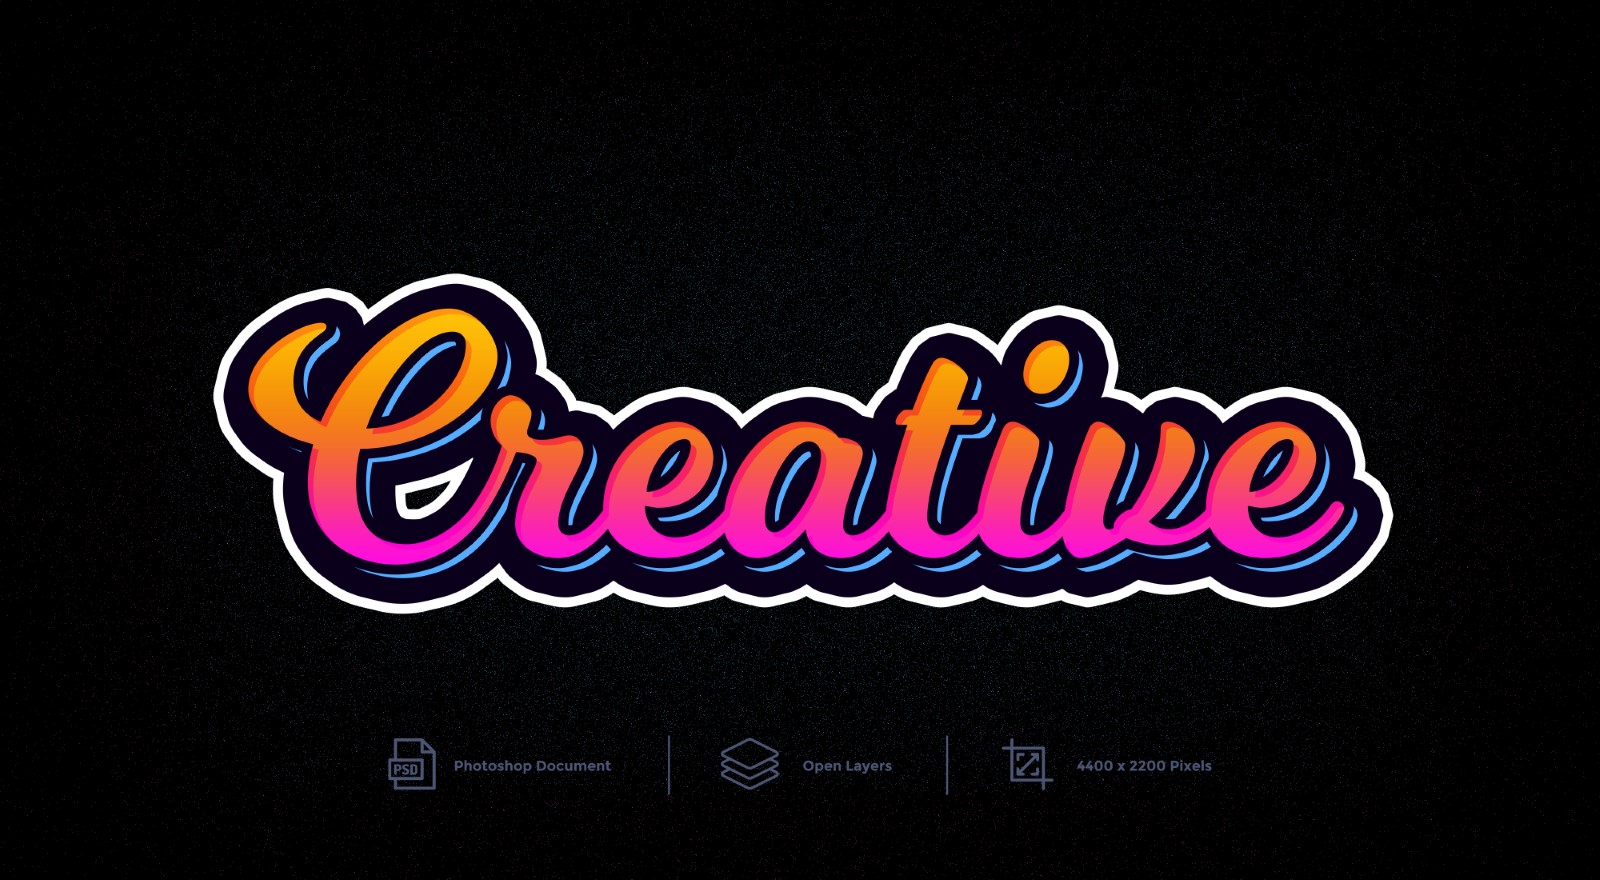 Creartive Text Effect And Layer Style - Illustration